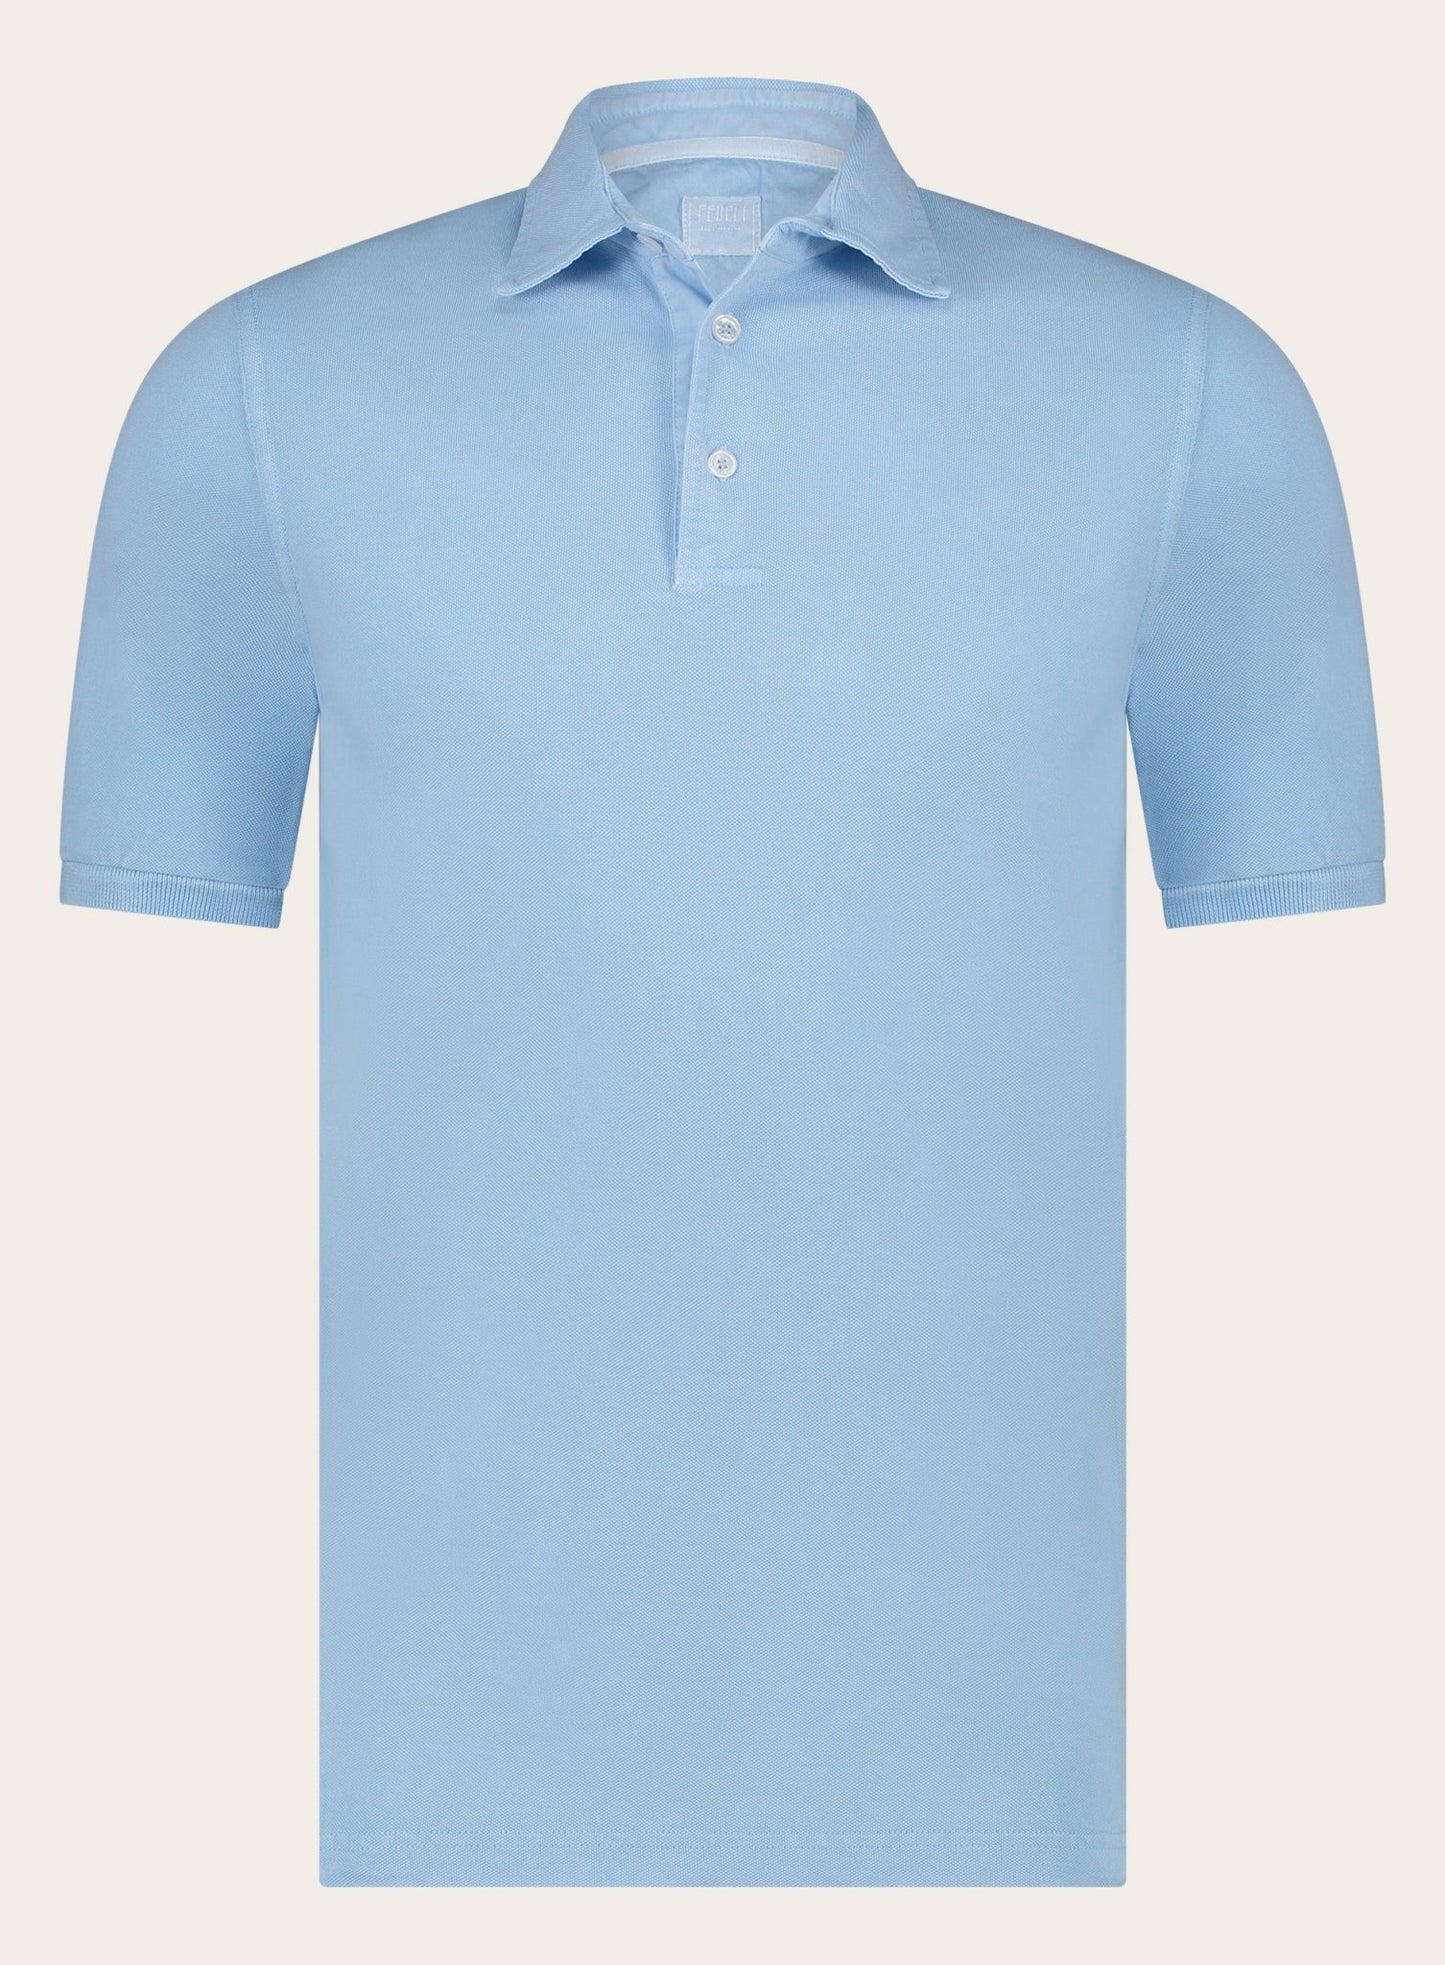 Polo with short sleeves made of cotton